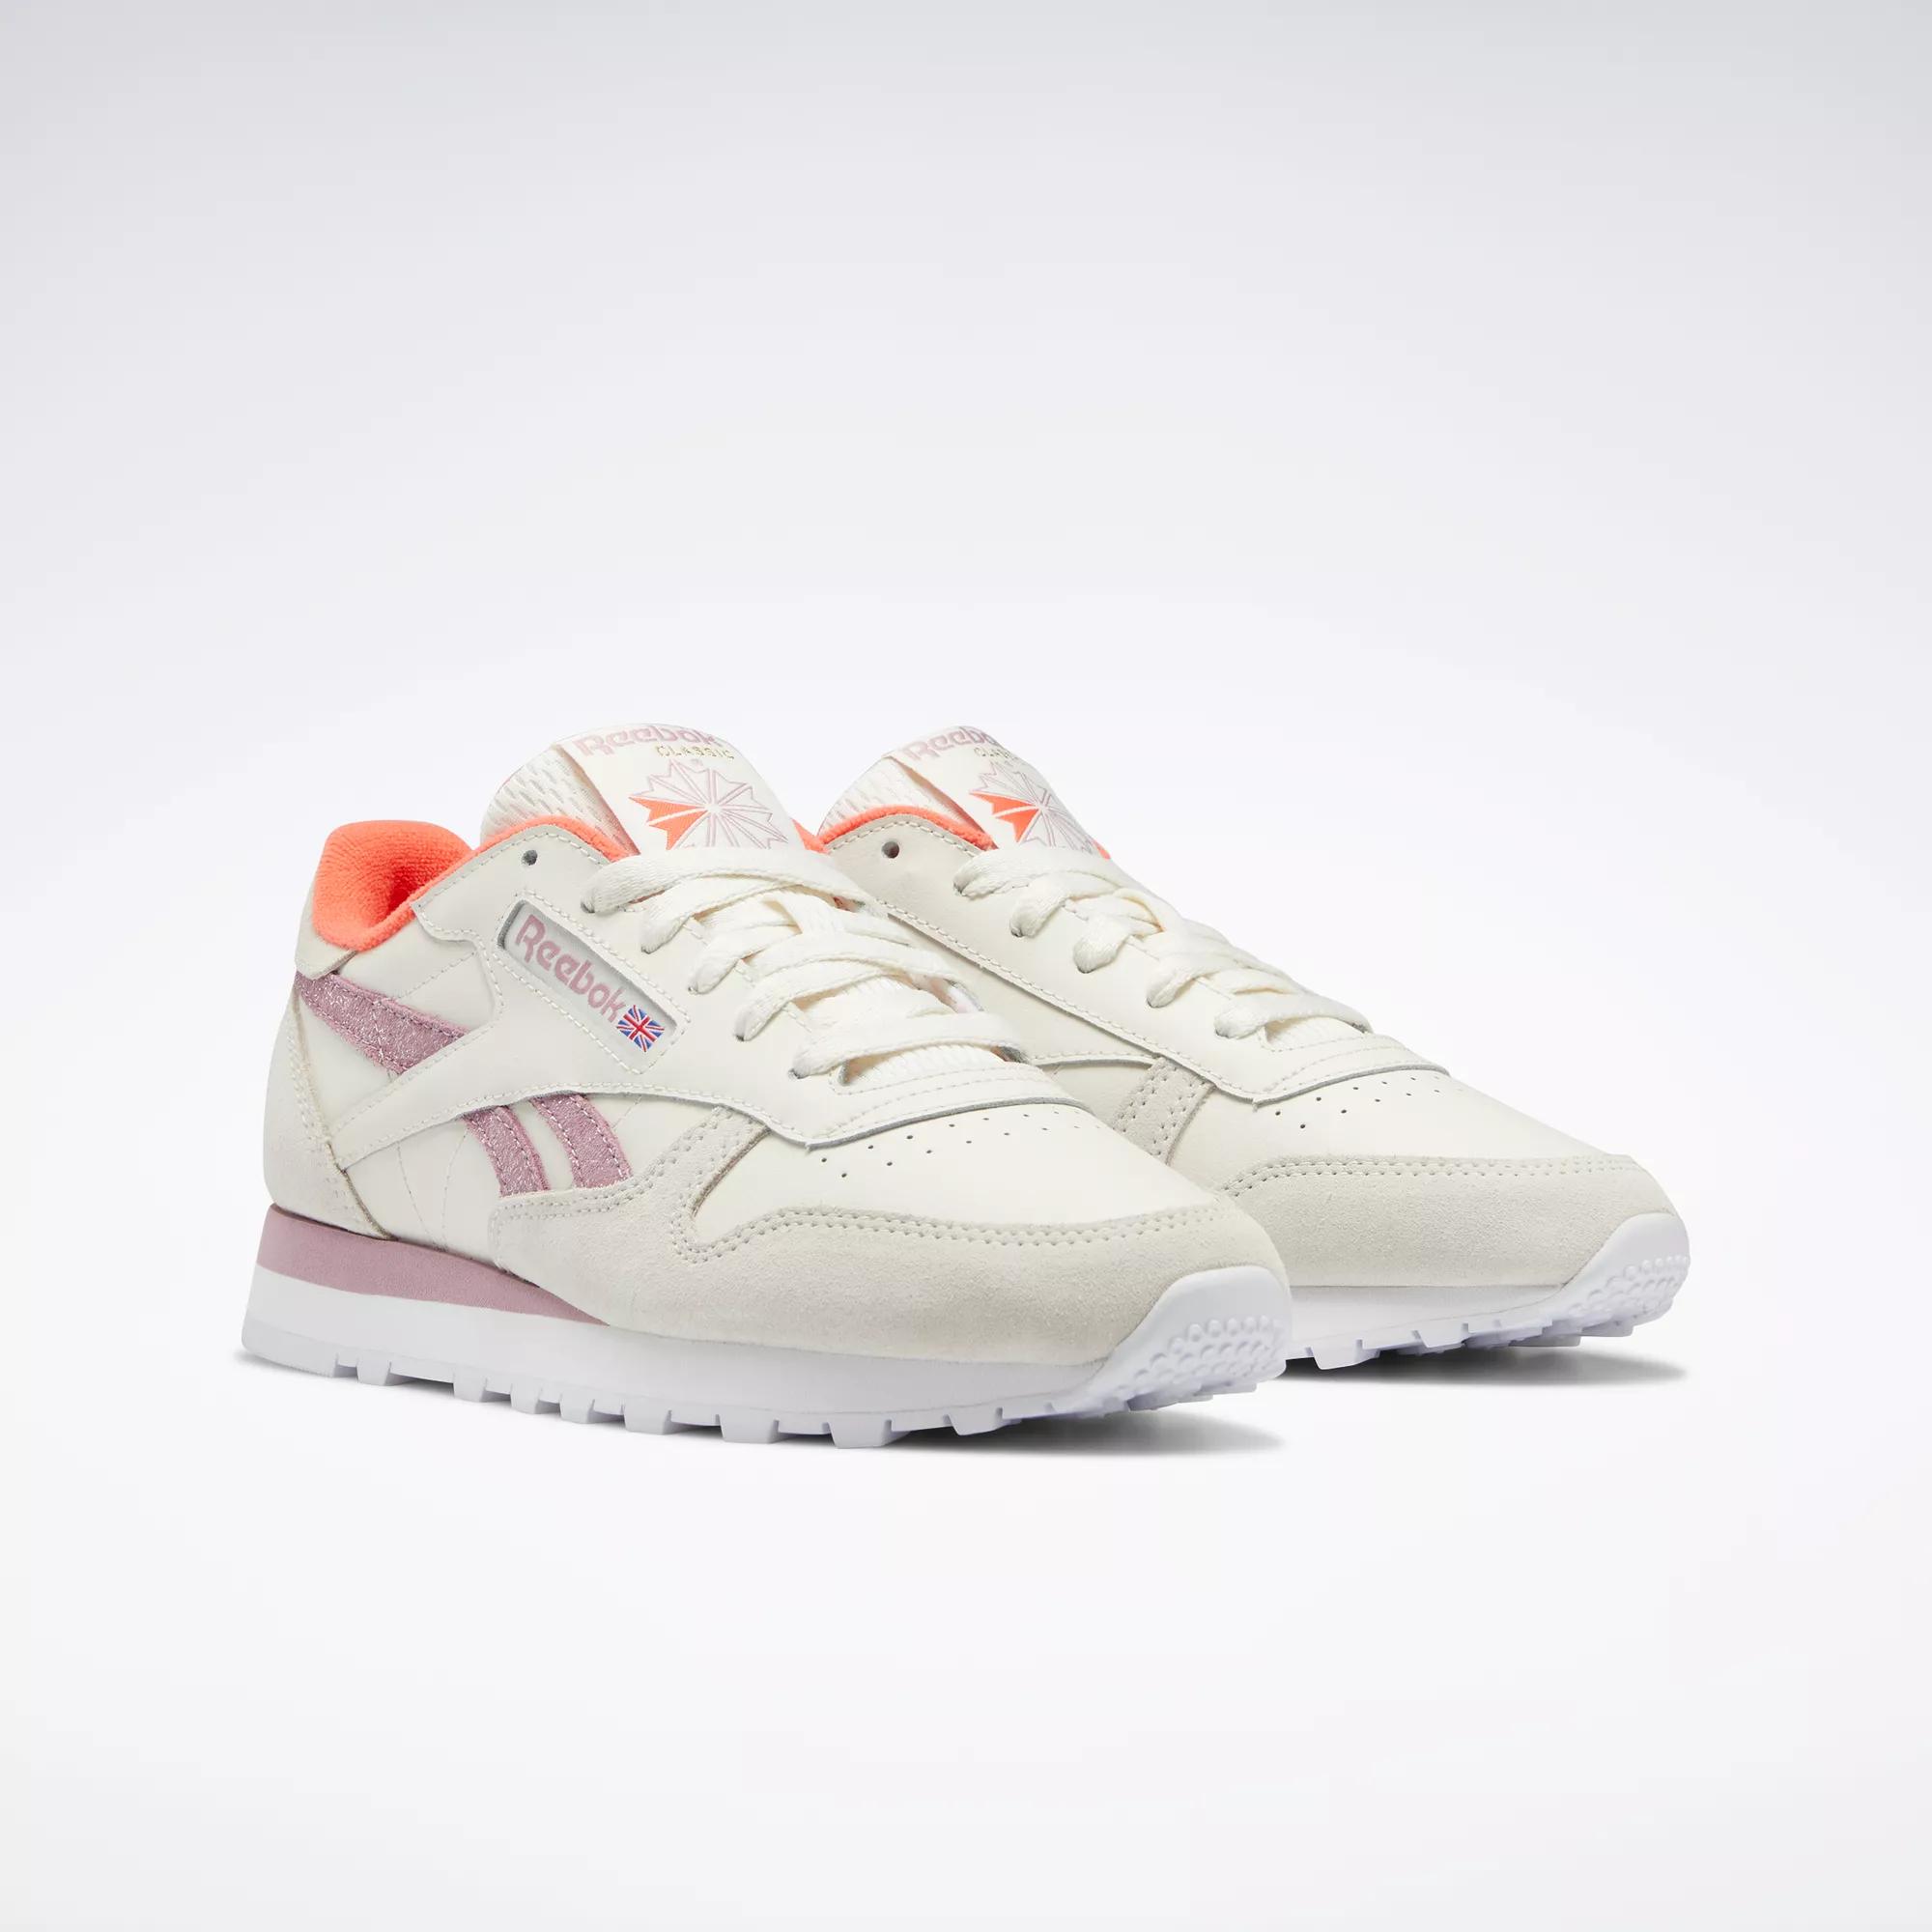 Classic Leather Shoes - Chalk / Infused Lilac / Ftwr White | Reebok